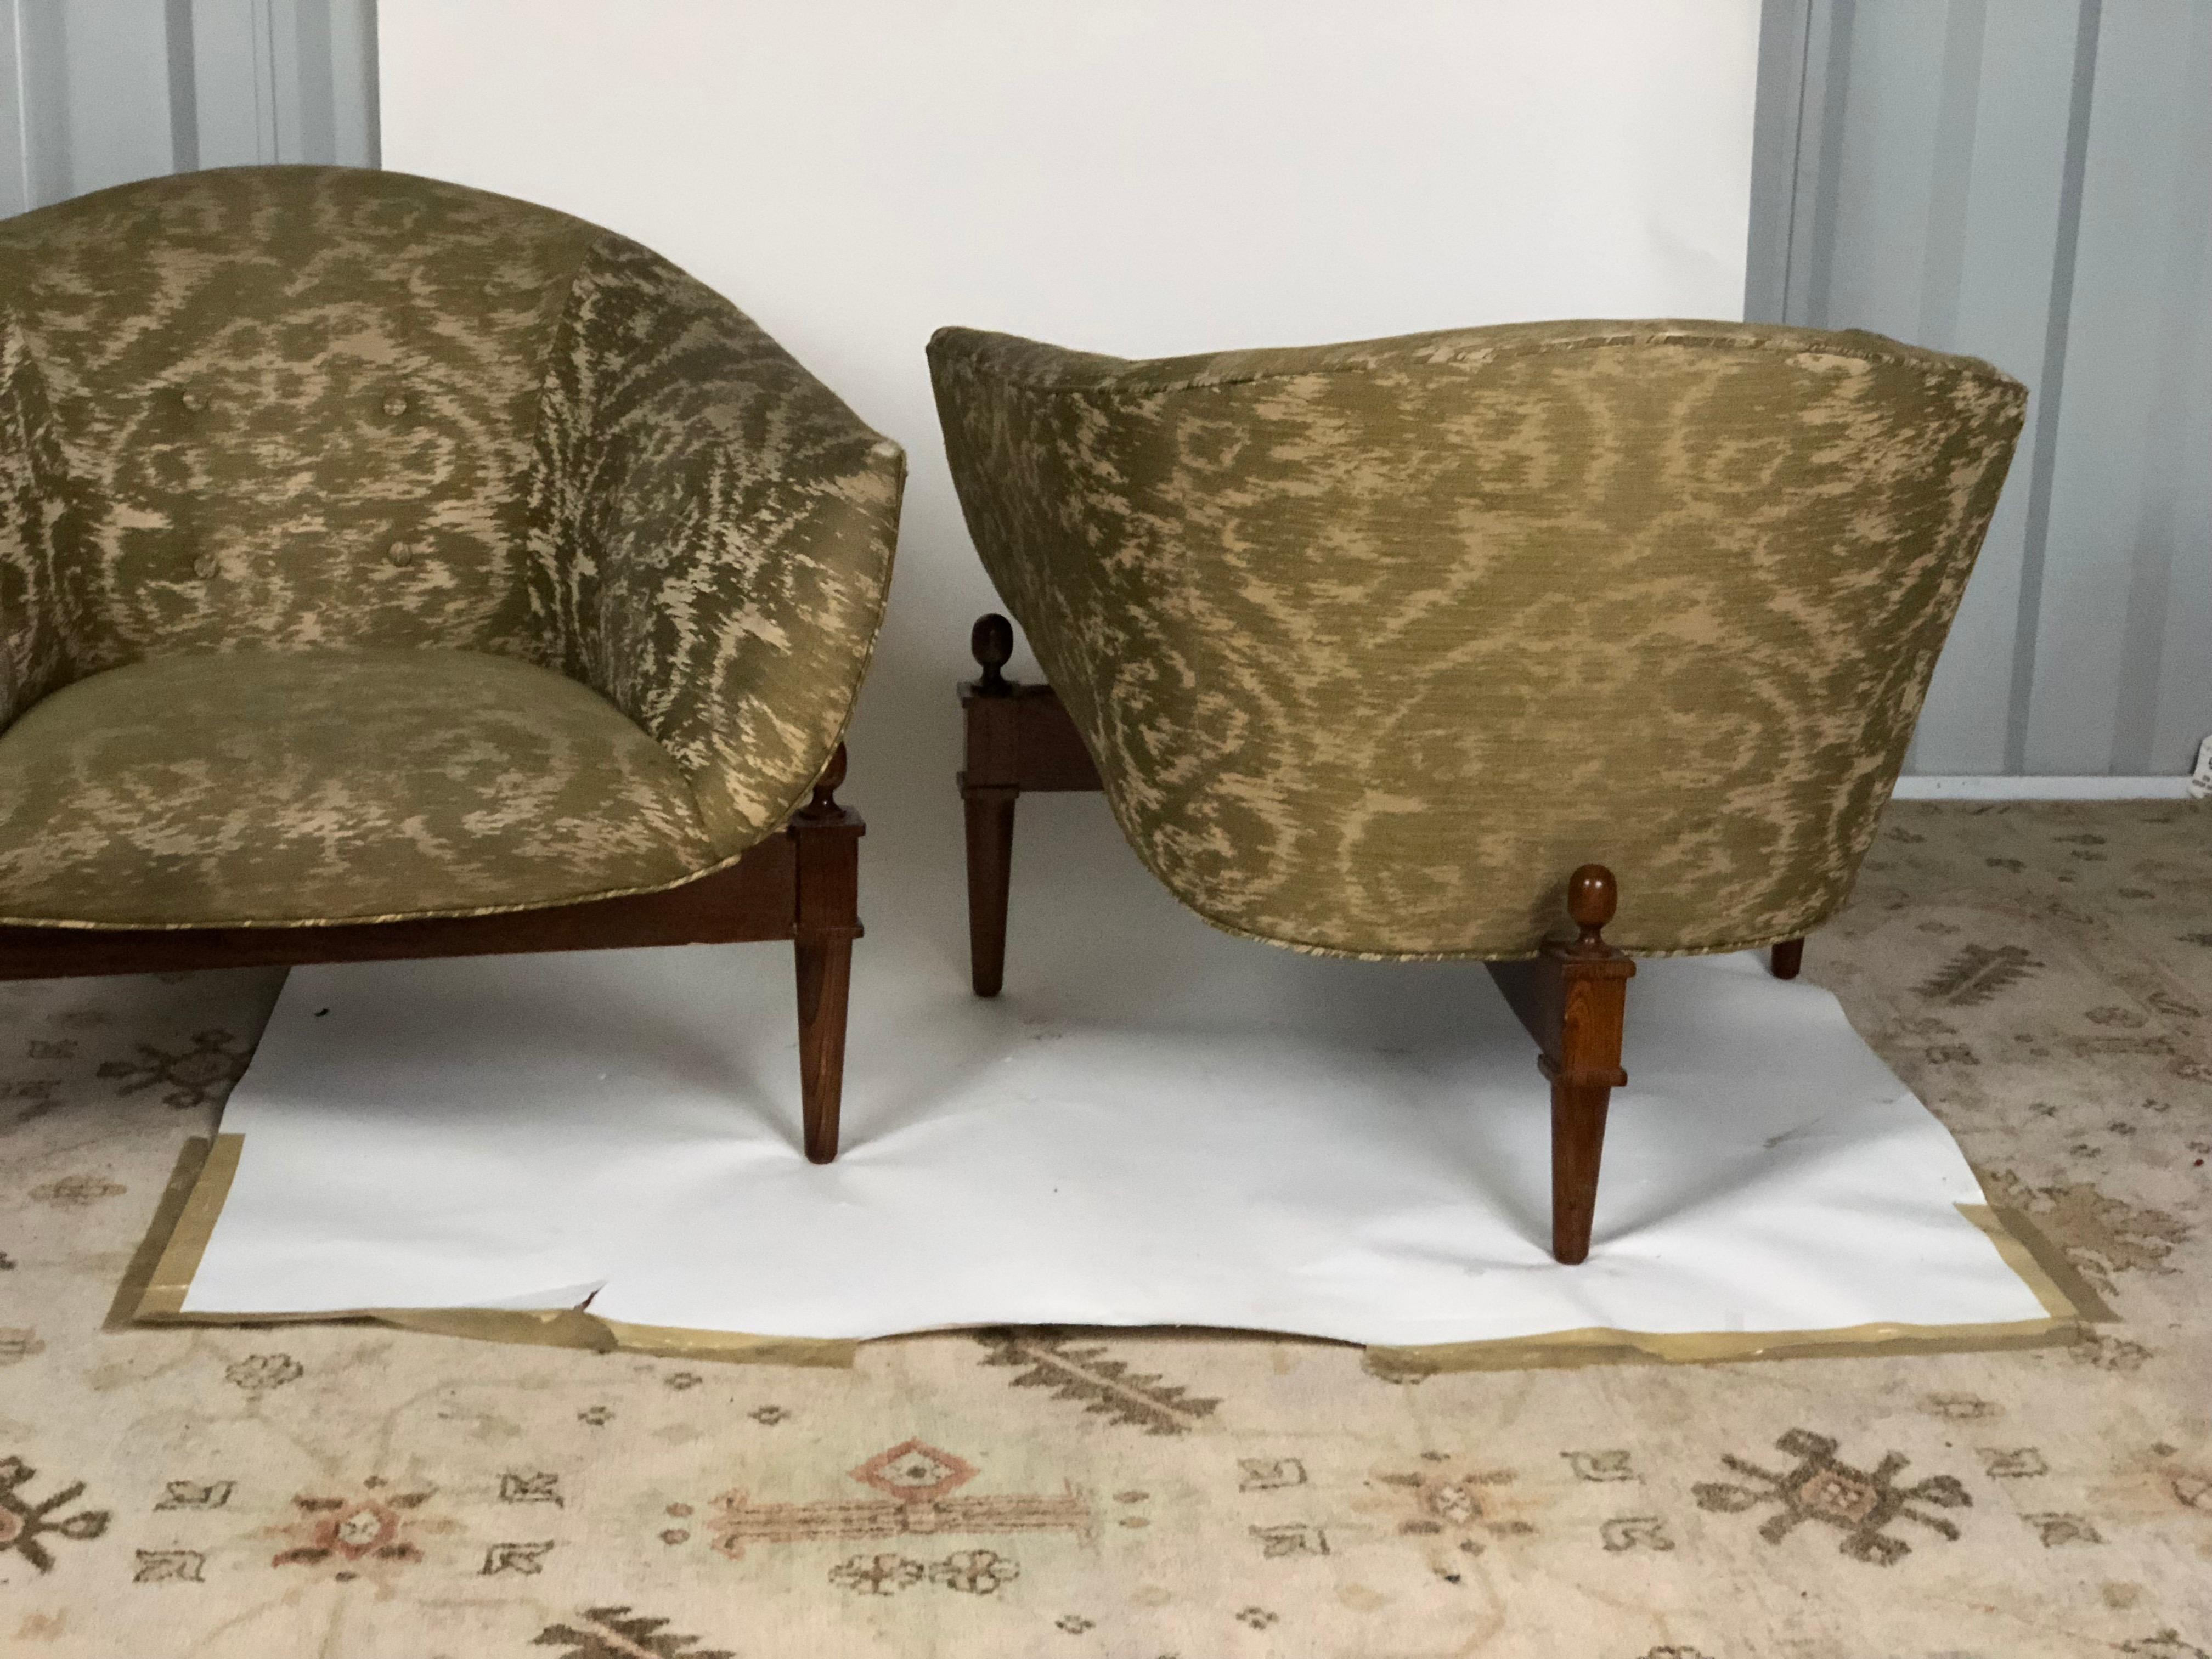 Pair of midcentury style Mimi club chairs on wooden tripod platforms with upholstered tufted seats. Made by Global Views. Measures: Seat height is 16 inches and the arm height is 23 inches.